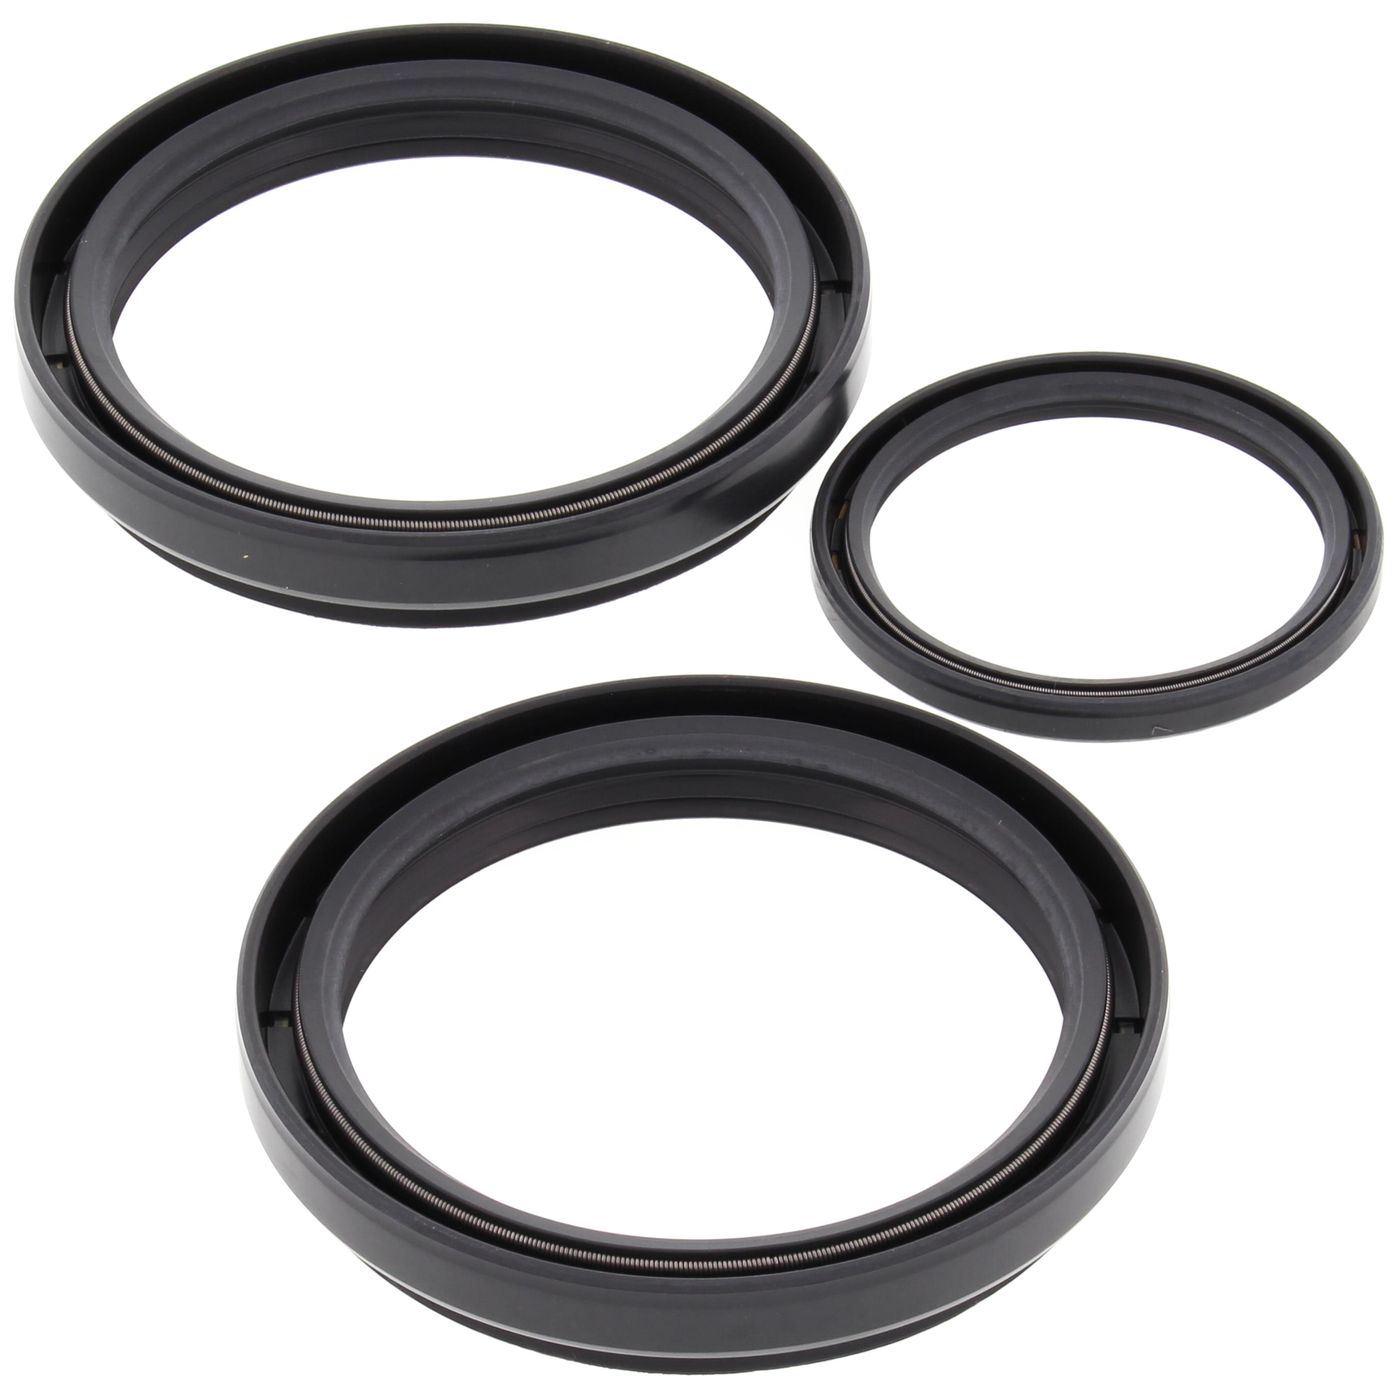 Wrp Diff Seal Kits - WRP252072-5 image